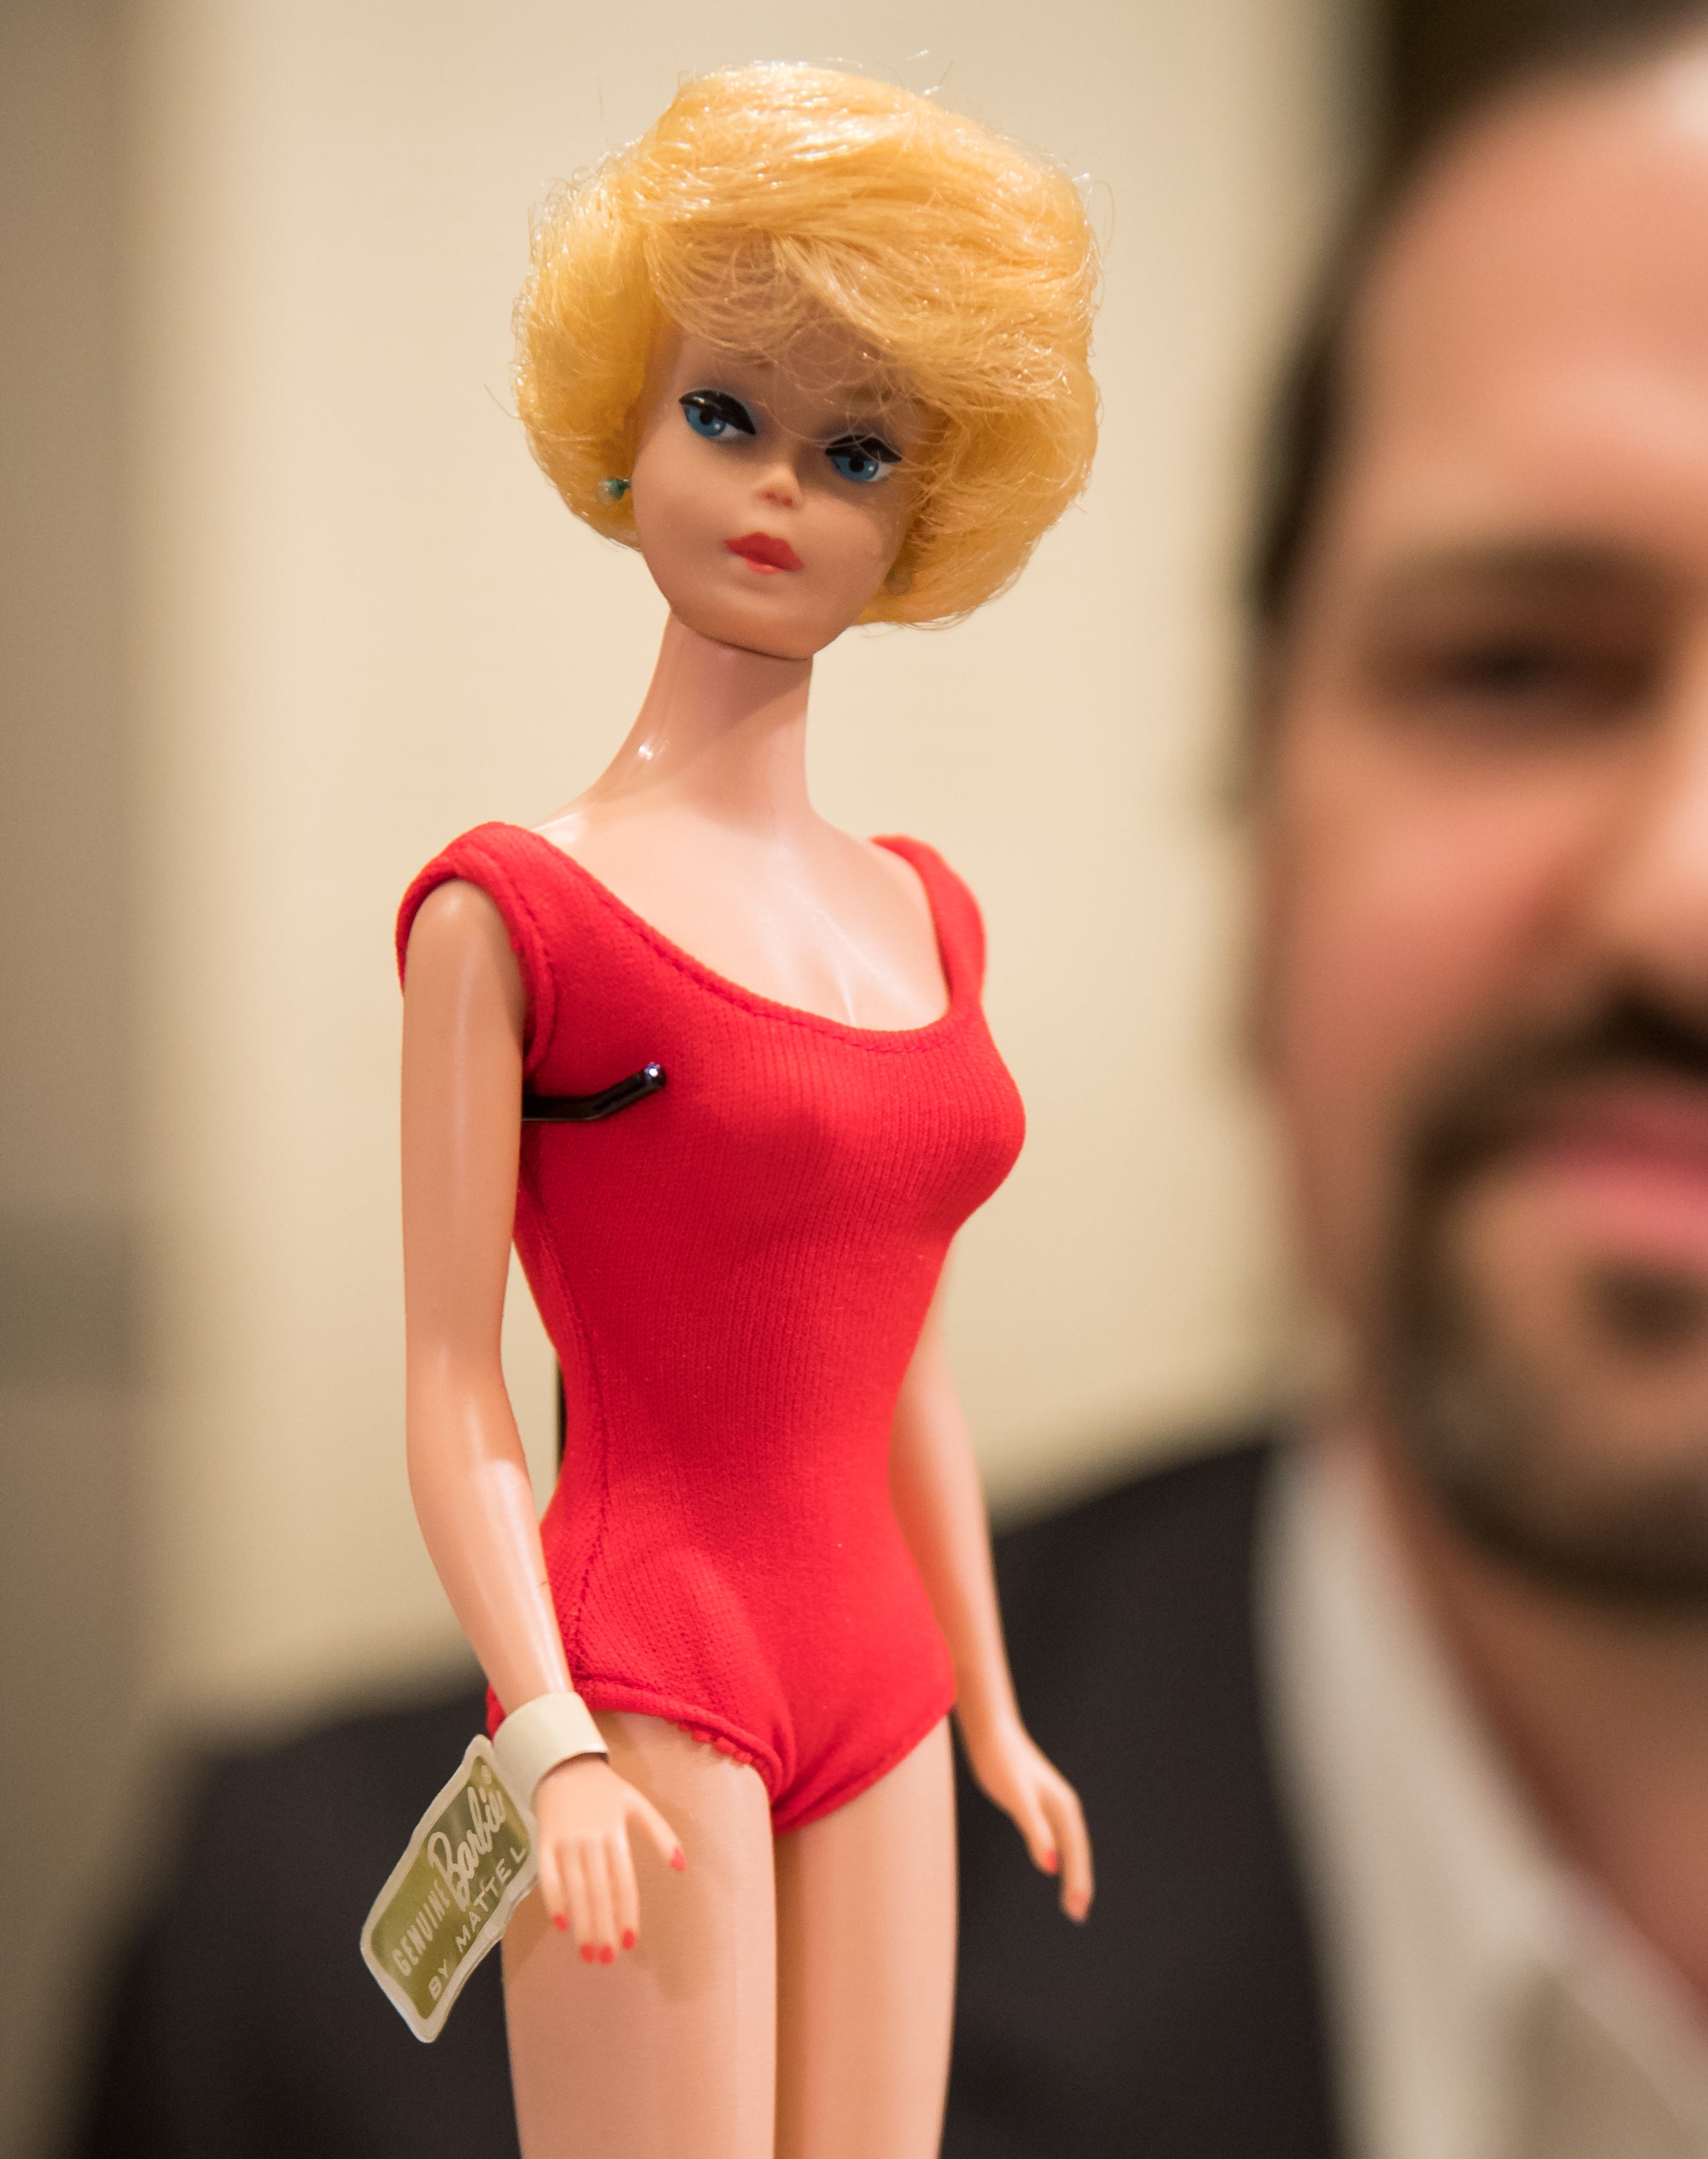 Professor of Chemistry Jens Pesch looks at a historical Barbie doll from 1962 at the toy museum in Nuremberg, Germany, 24 February 2017